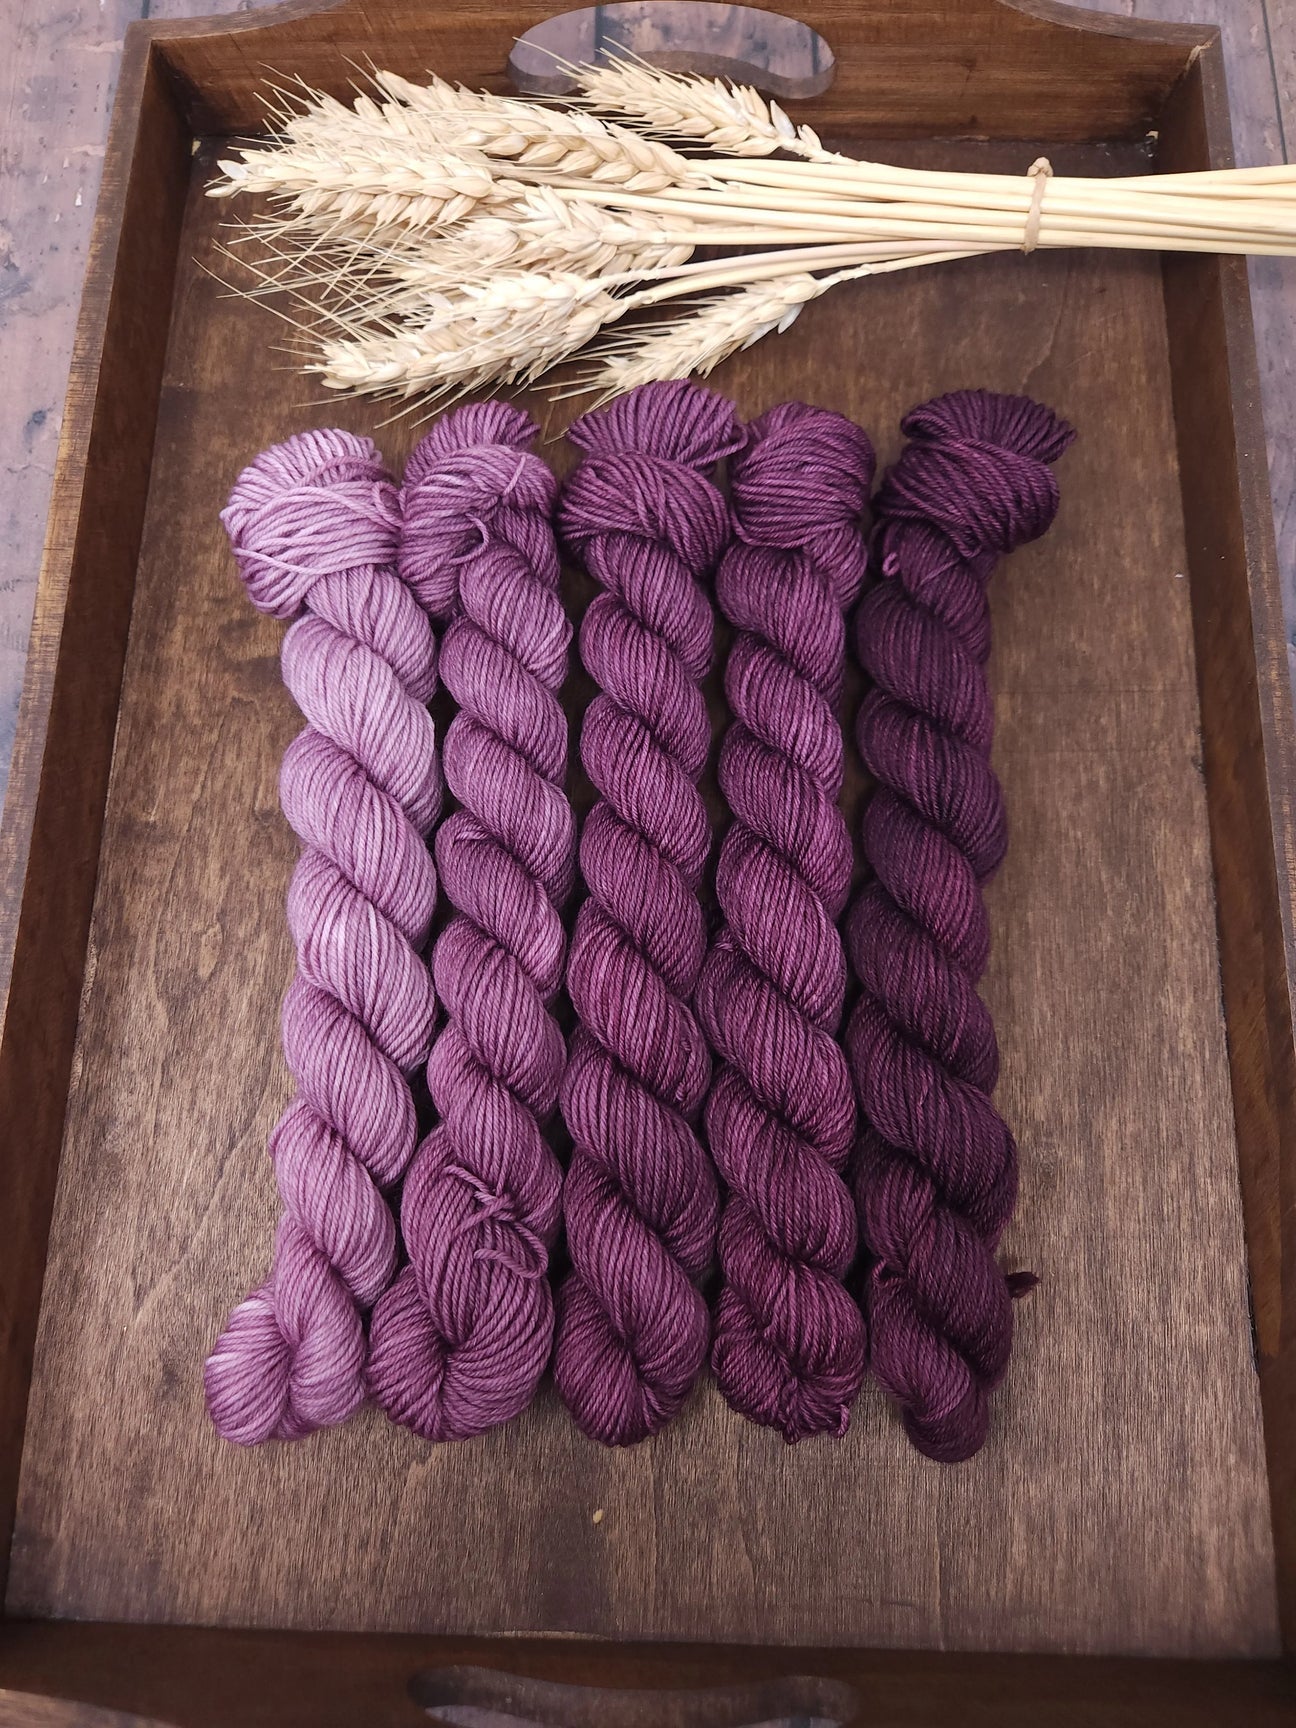 Get Knitfaced in CO: Mini Skein Sets